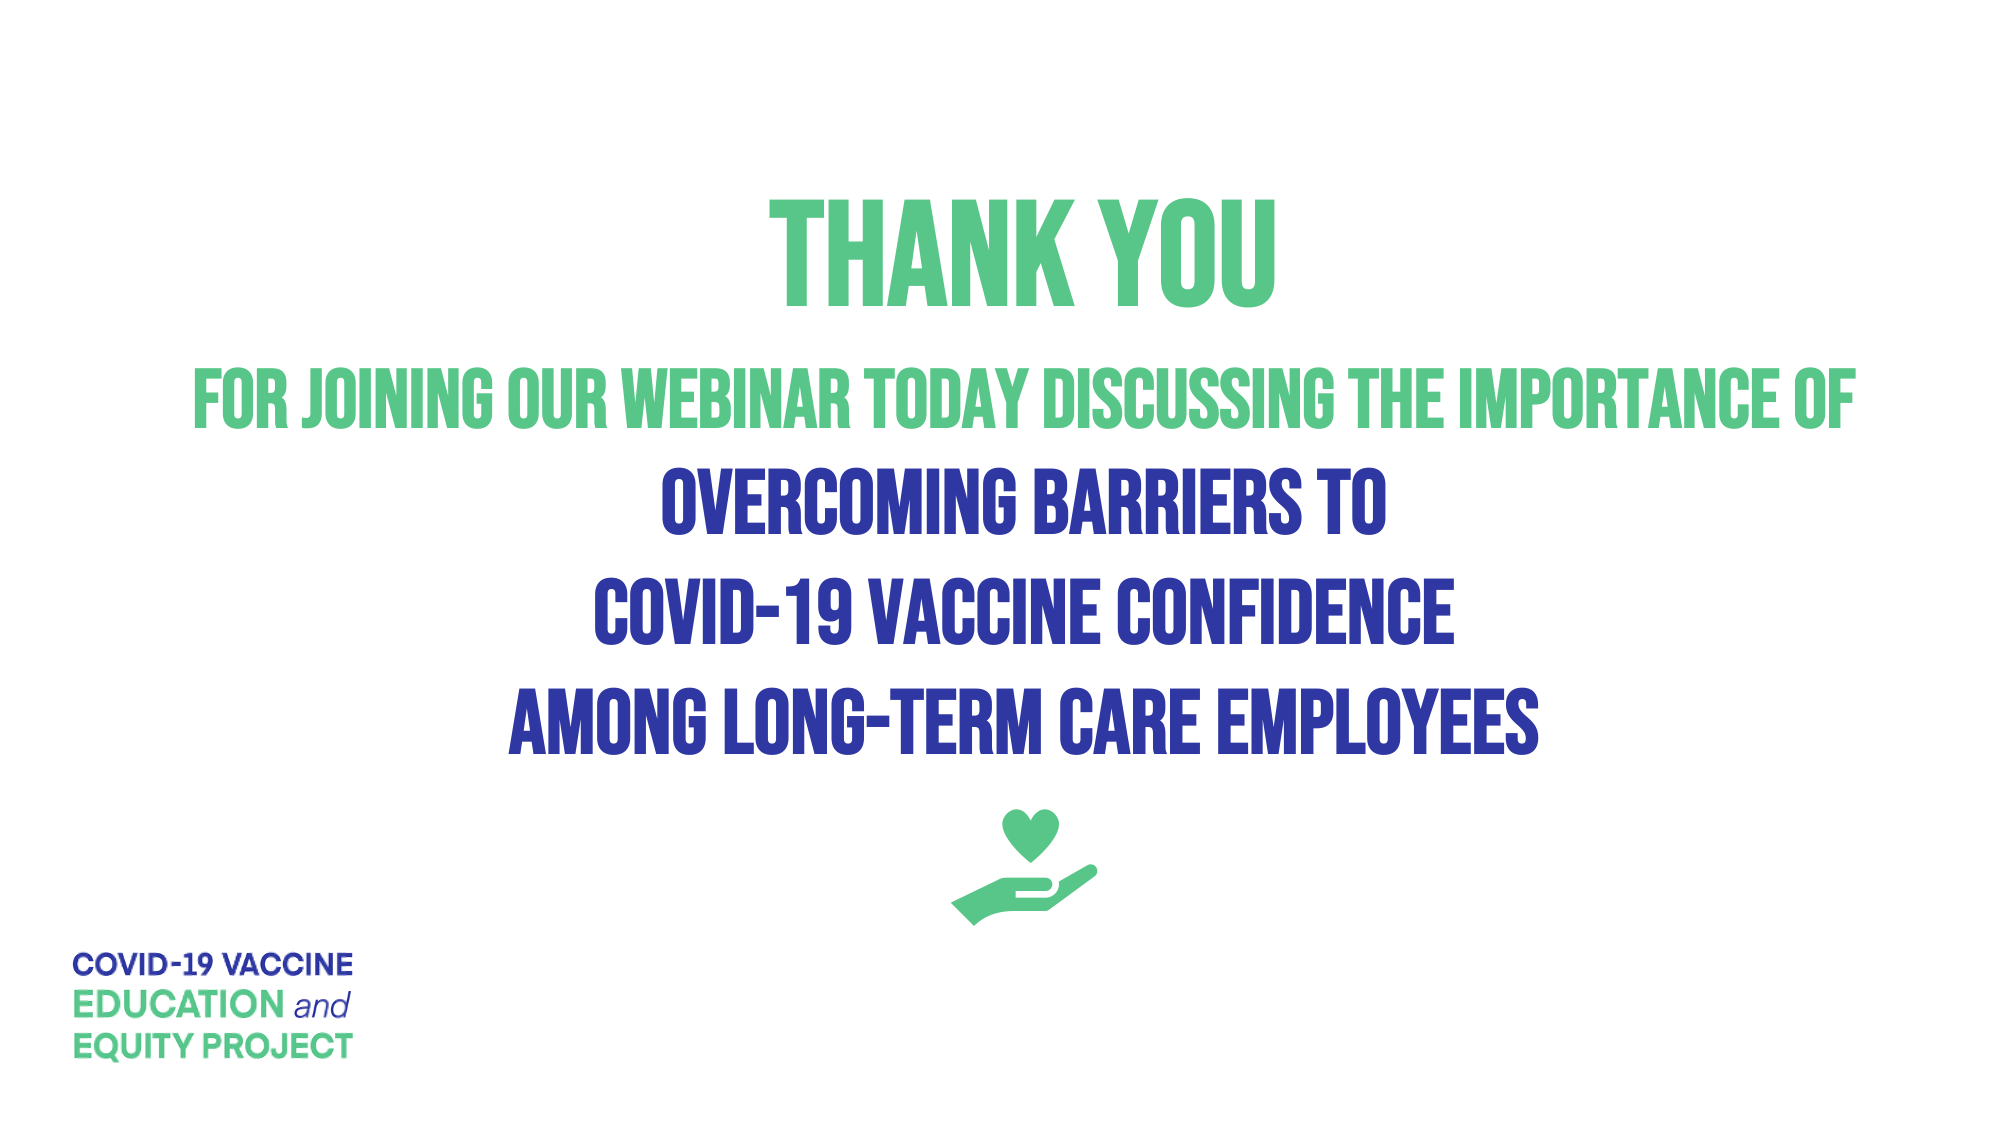 Webinar Recording: Overcoming Barriers to COVID-19 Vaccine Confidence in Long-Term Care